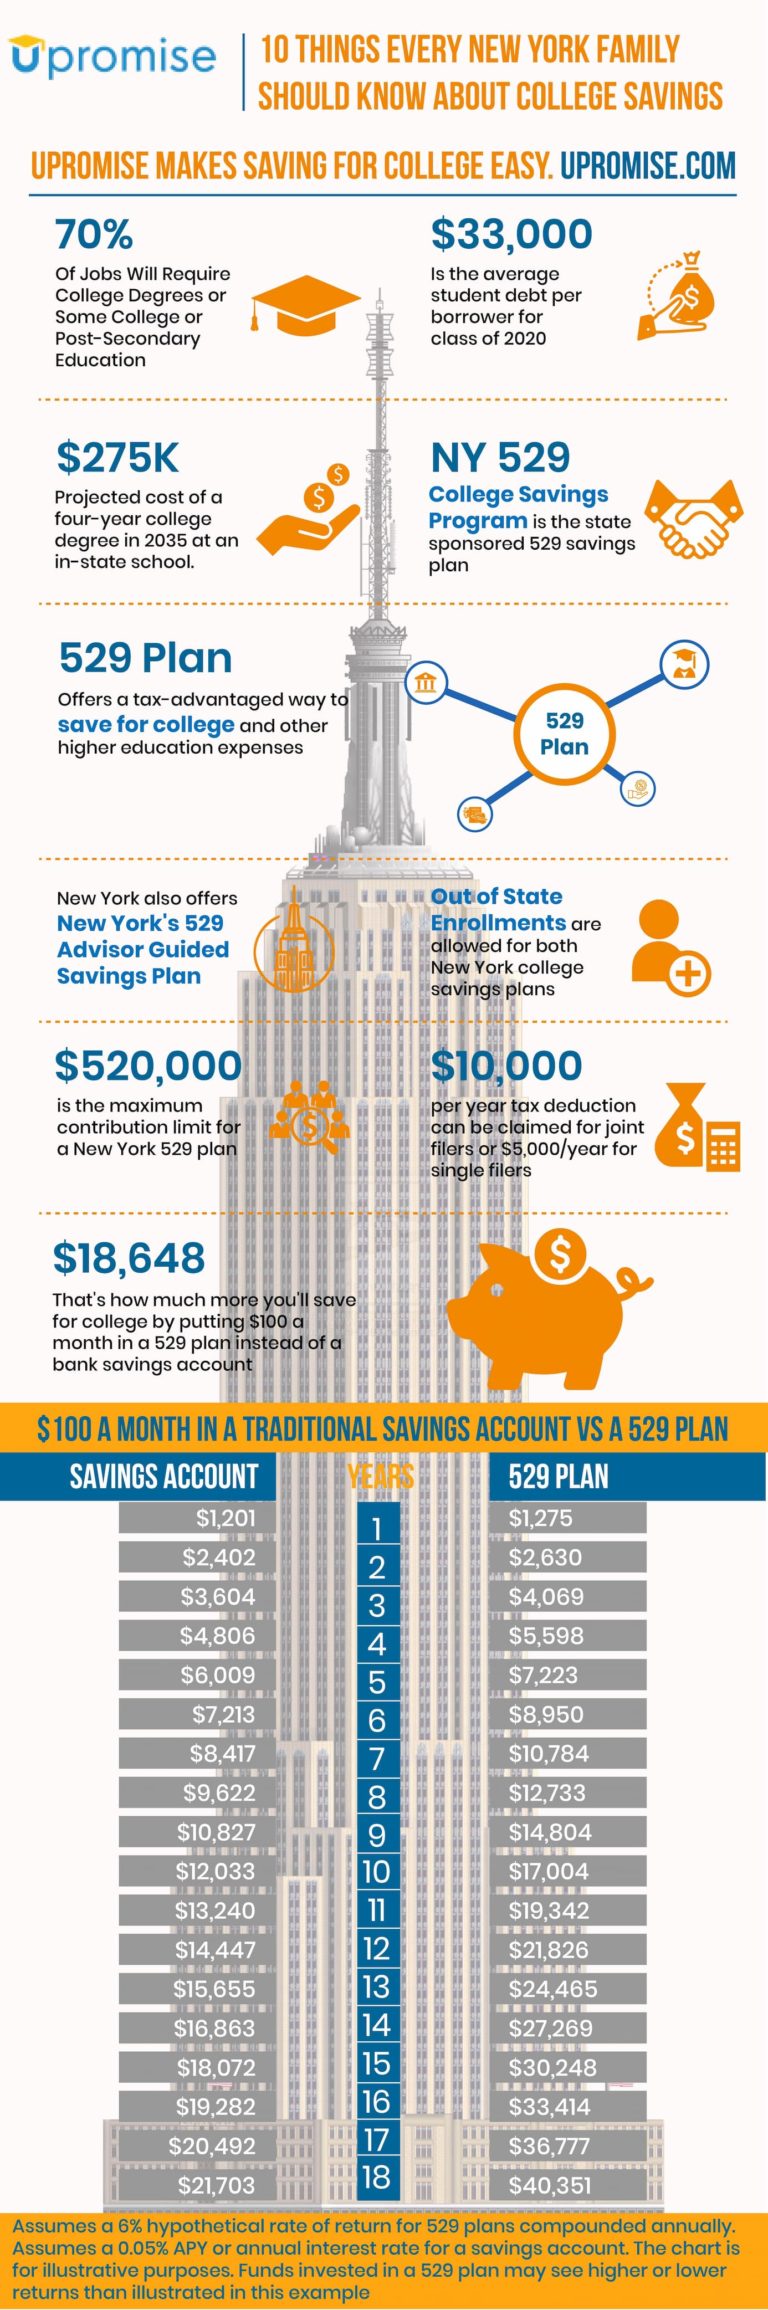 529 Plan New York Infographic 10 Facts About NY's 529 to Know